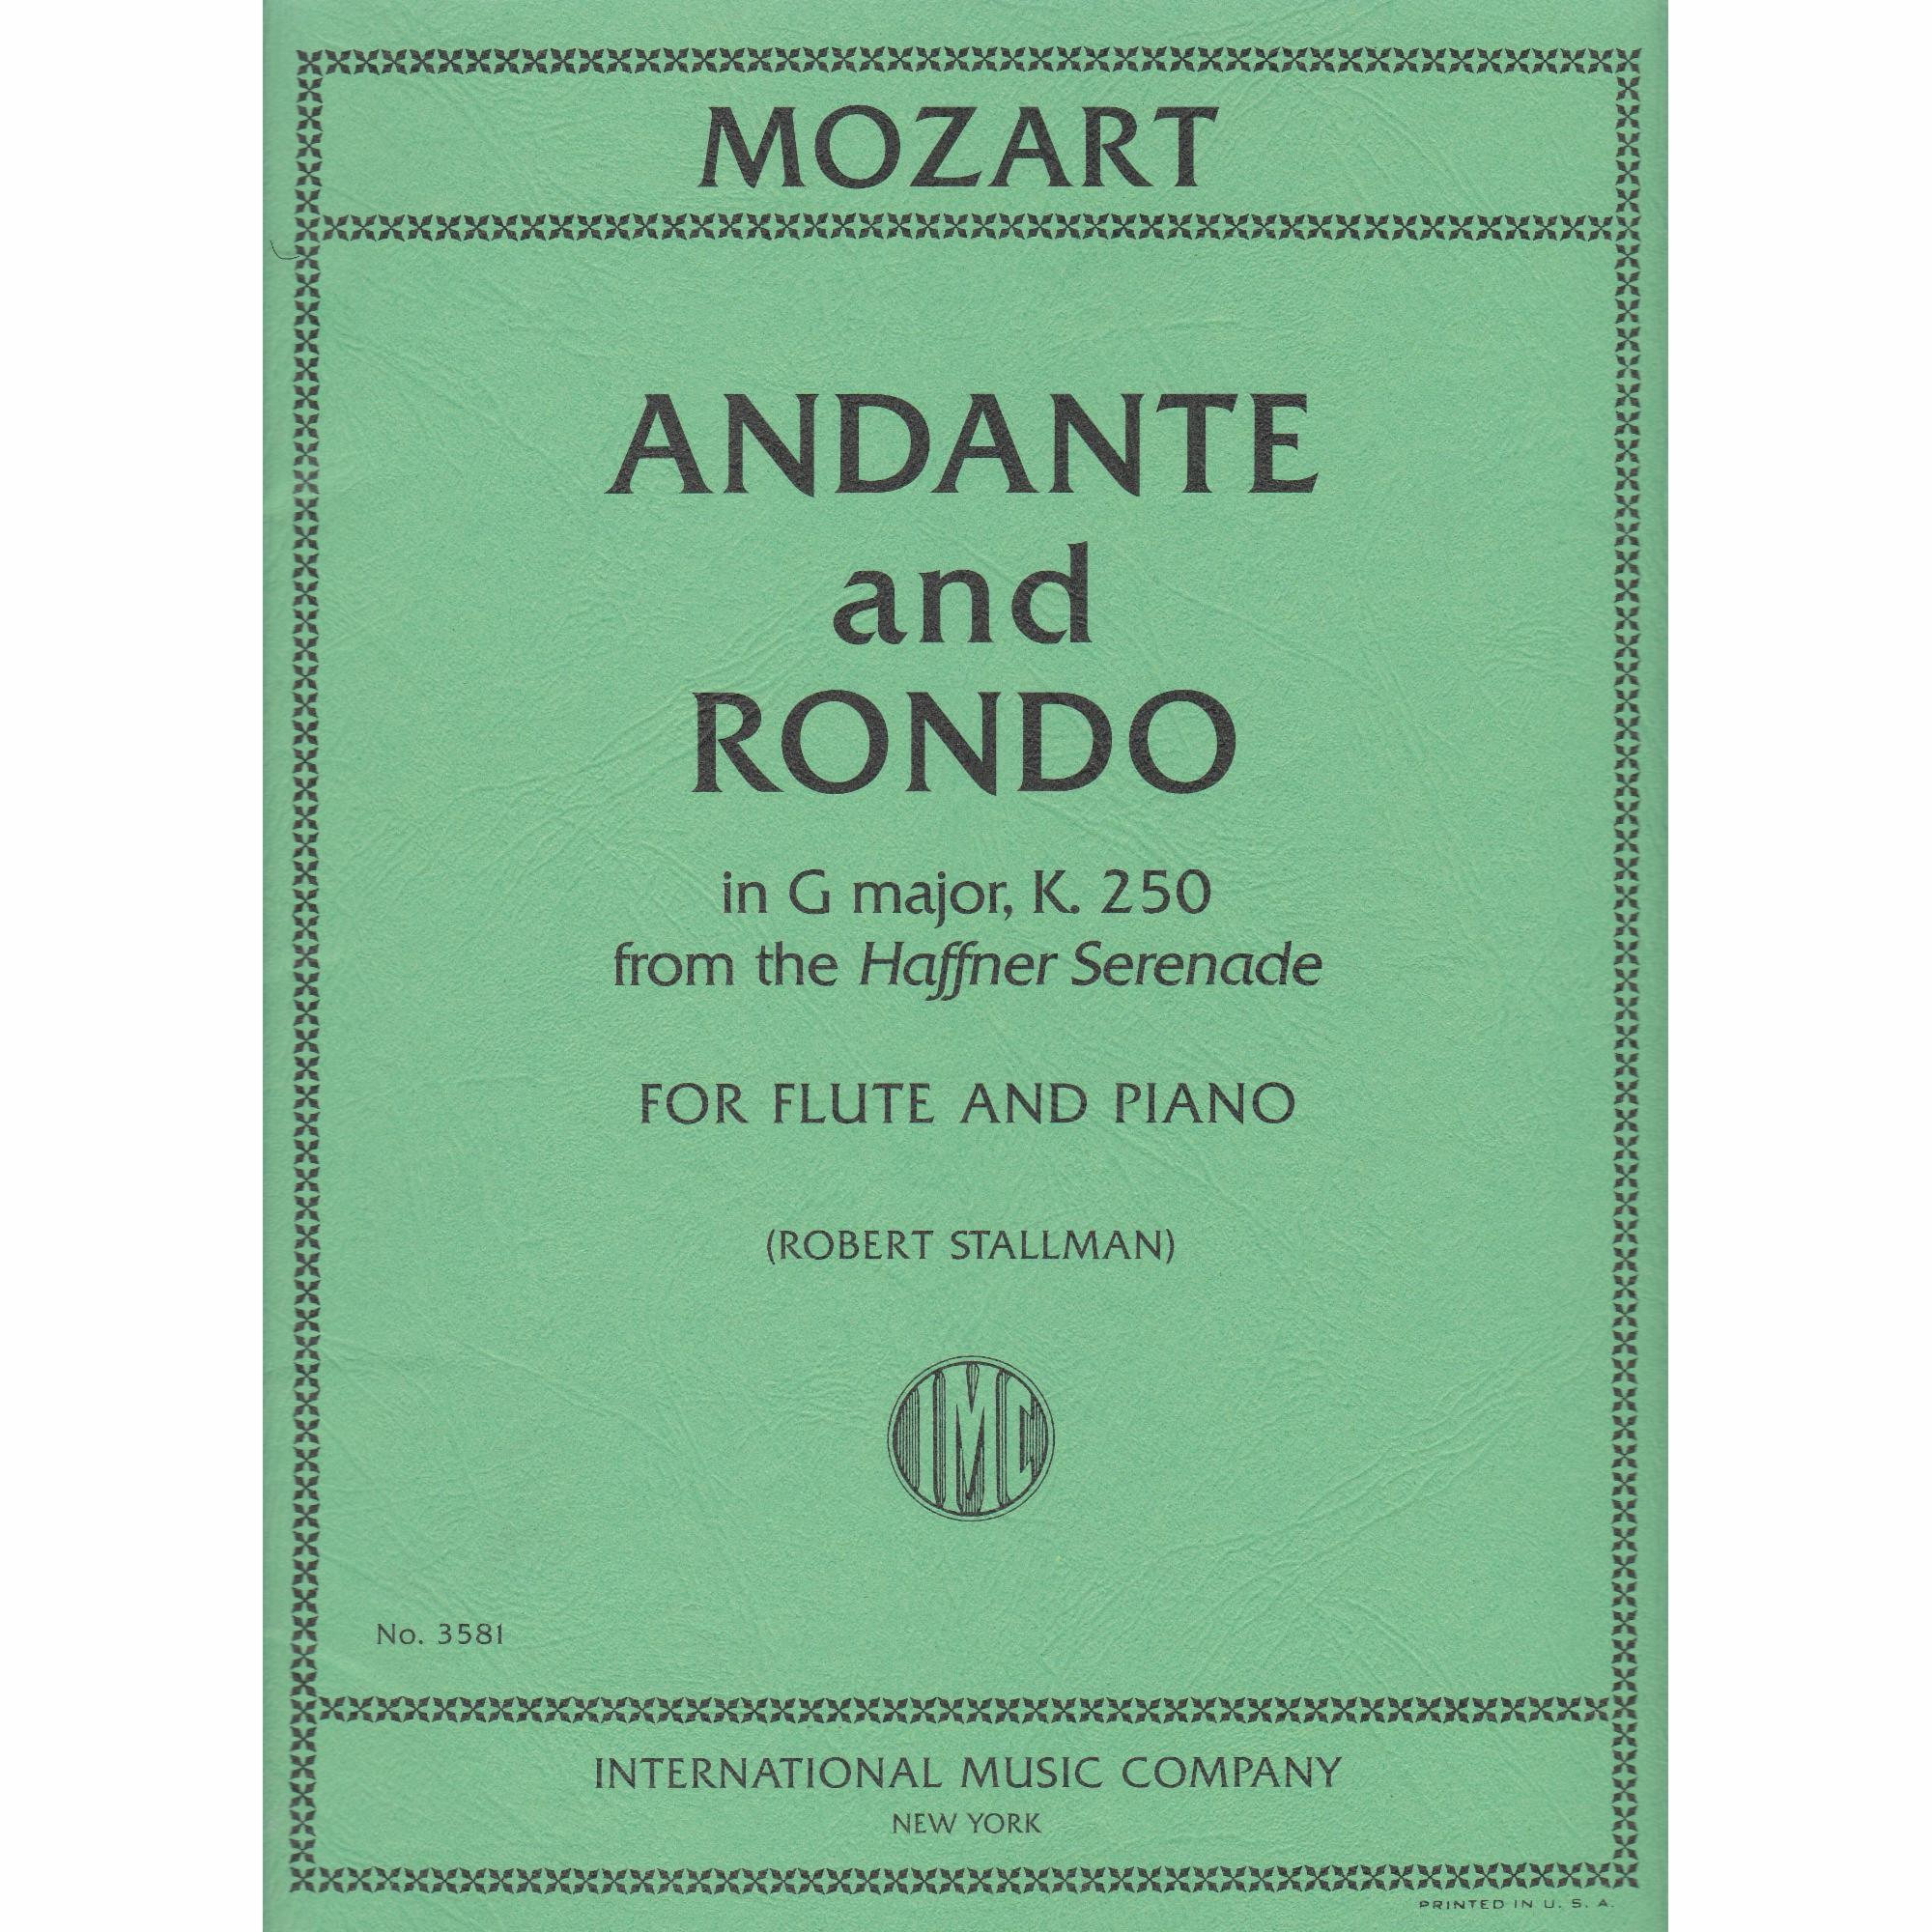 Andante and Rondo (from The Haffner Serenade) for Flute and Piano